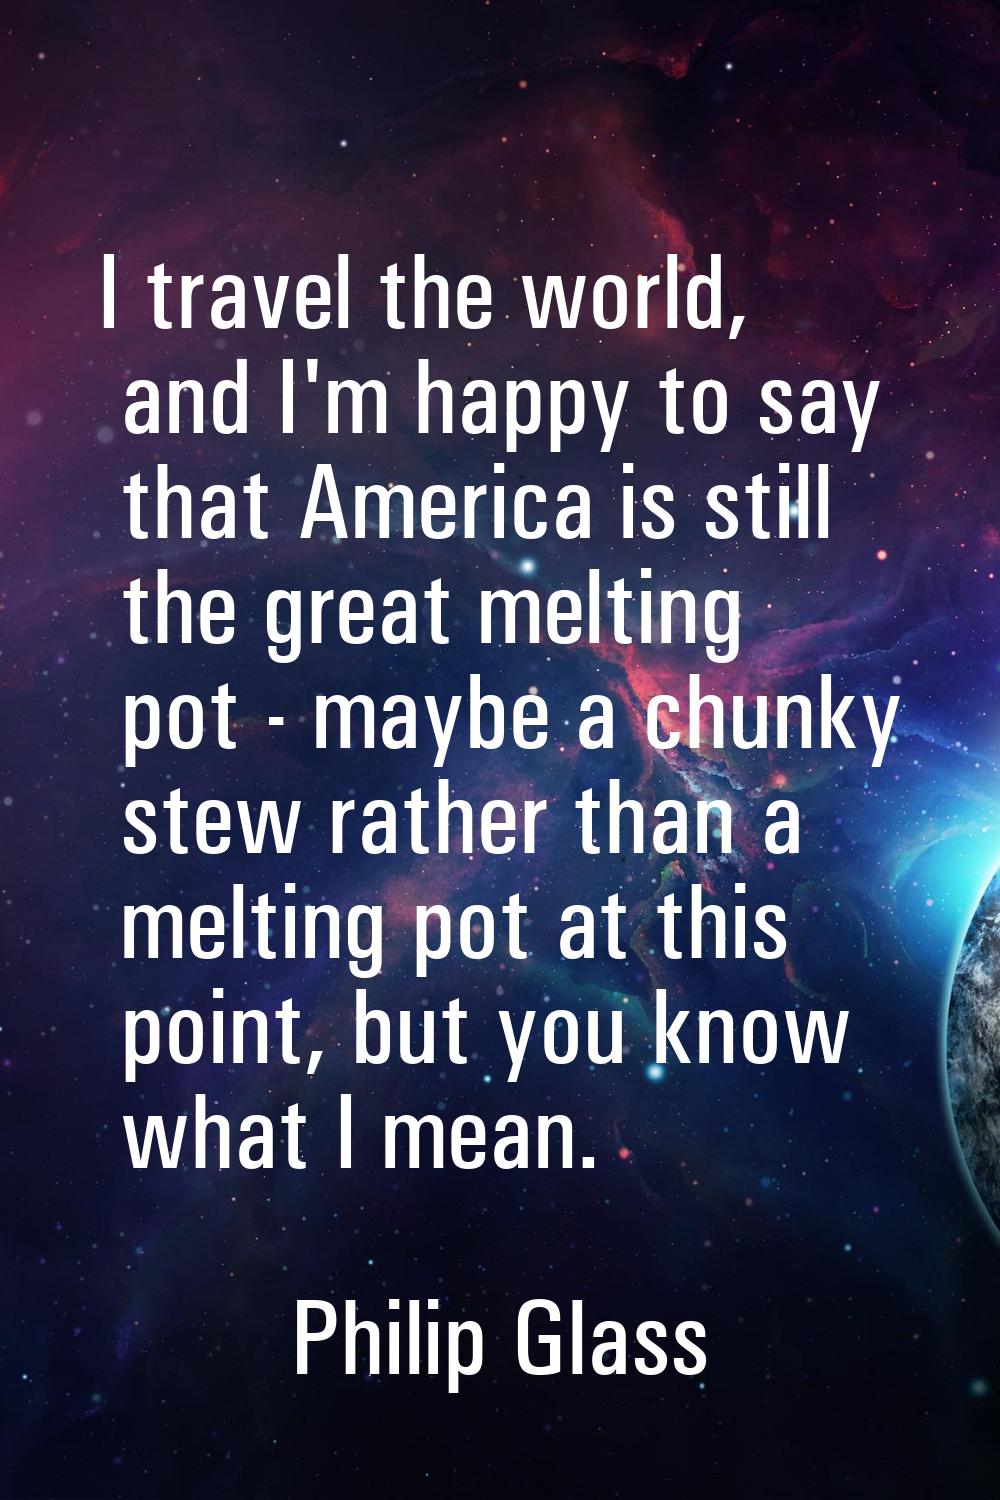 I travel the world, and I'm happy to say that America is still the great melting pot - maybe a chun